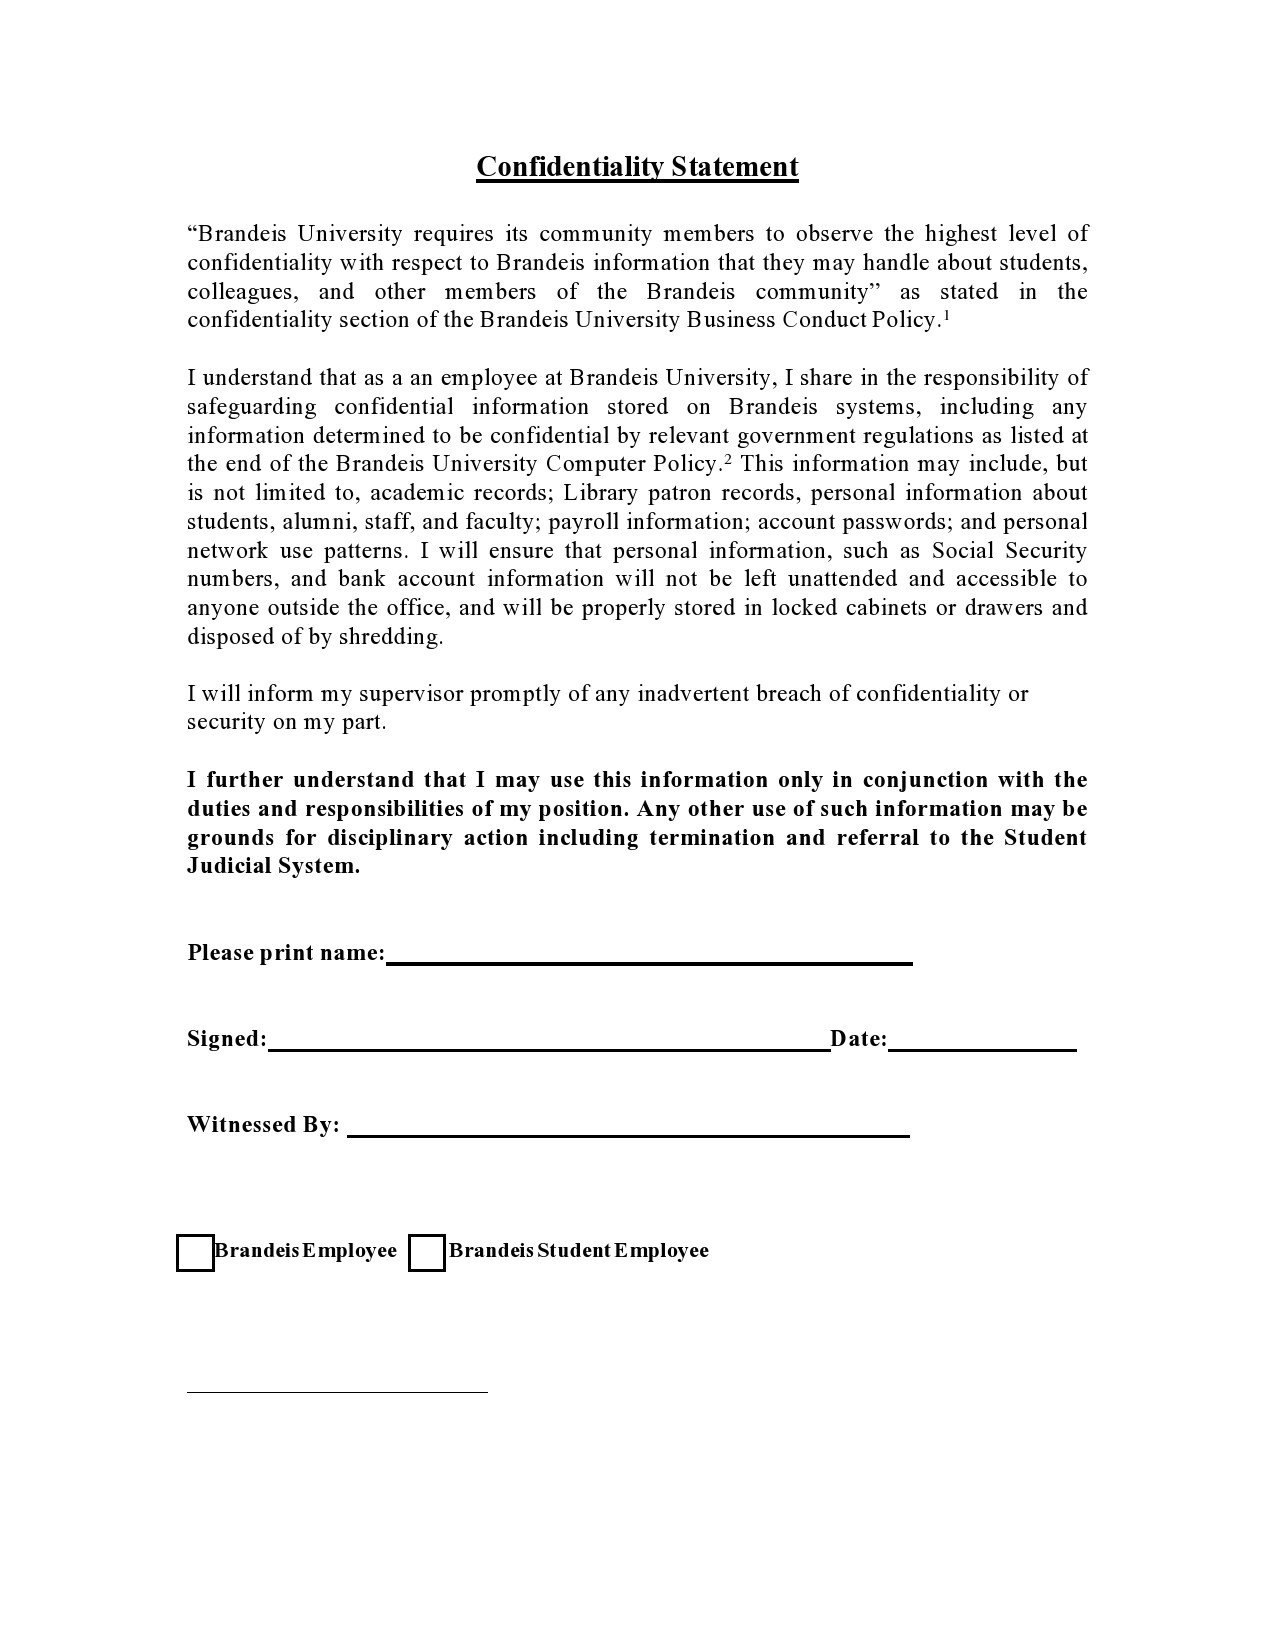 Free confidentiality statement 08